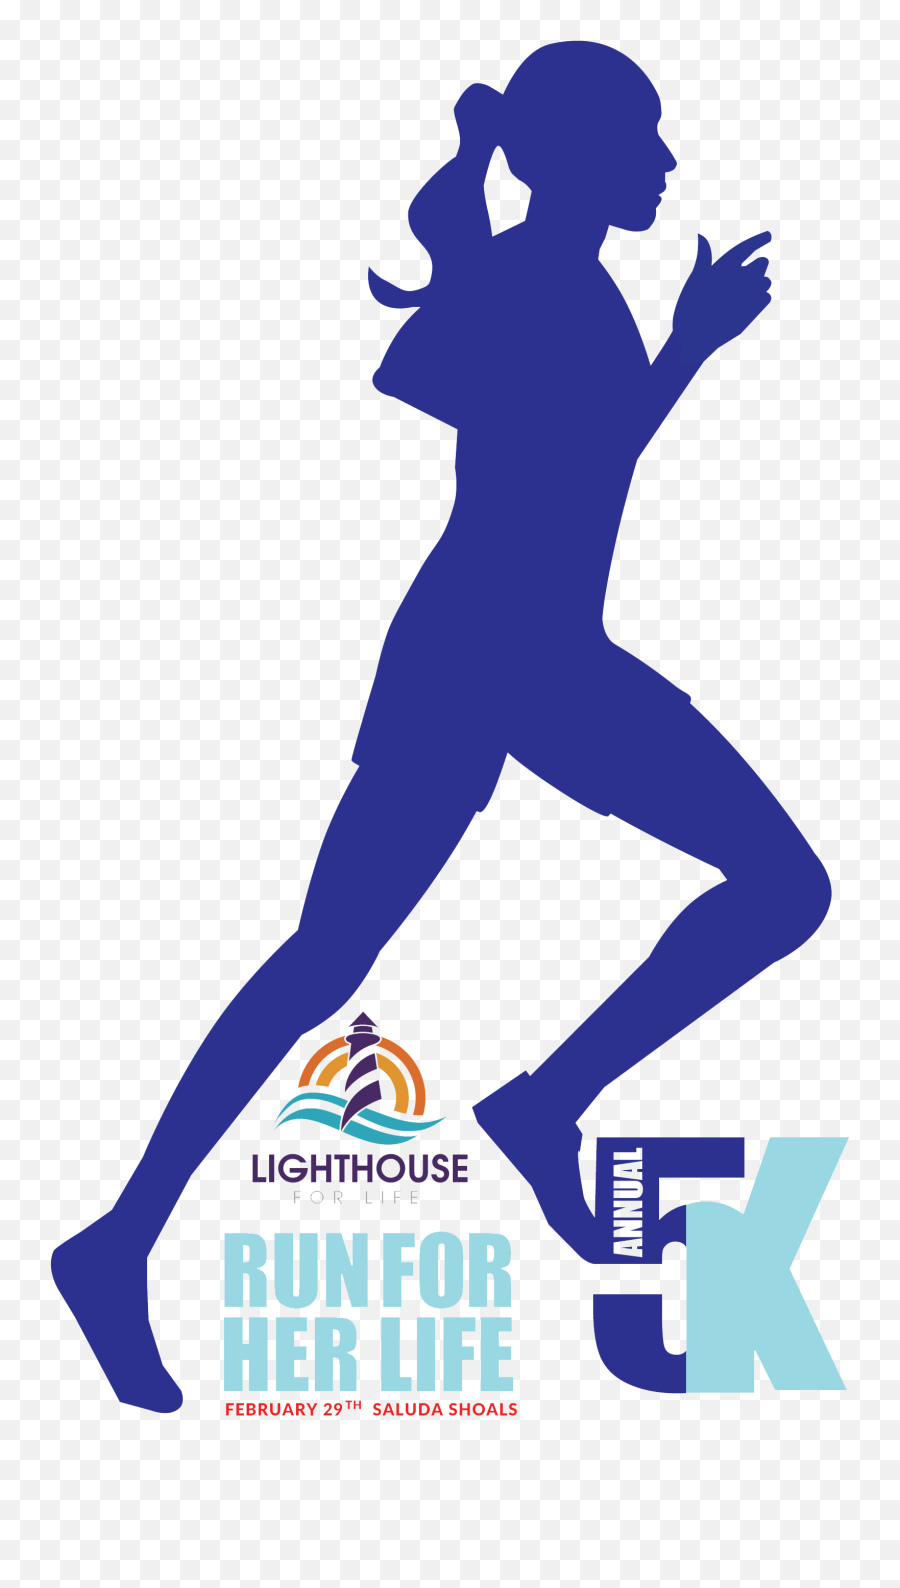 Lighthouse For Life 5k Registration - For Running Png,Lighthouse Silhouette Png